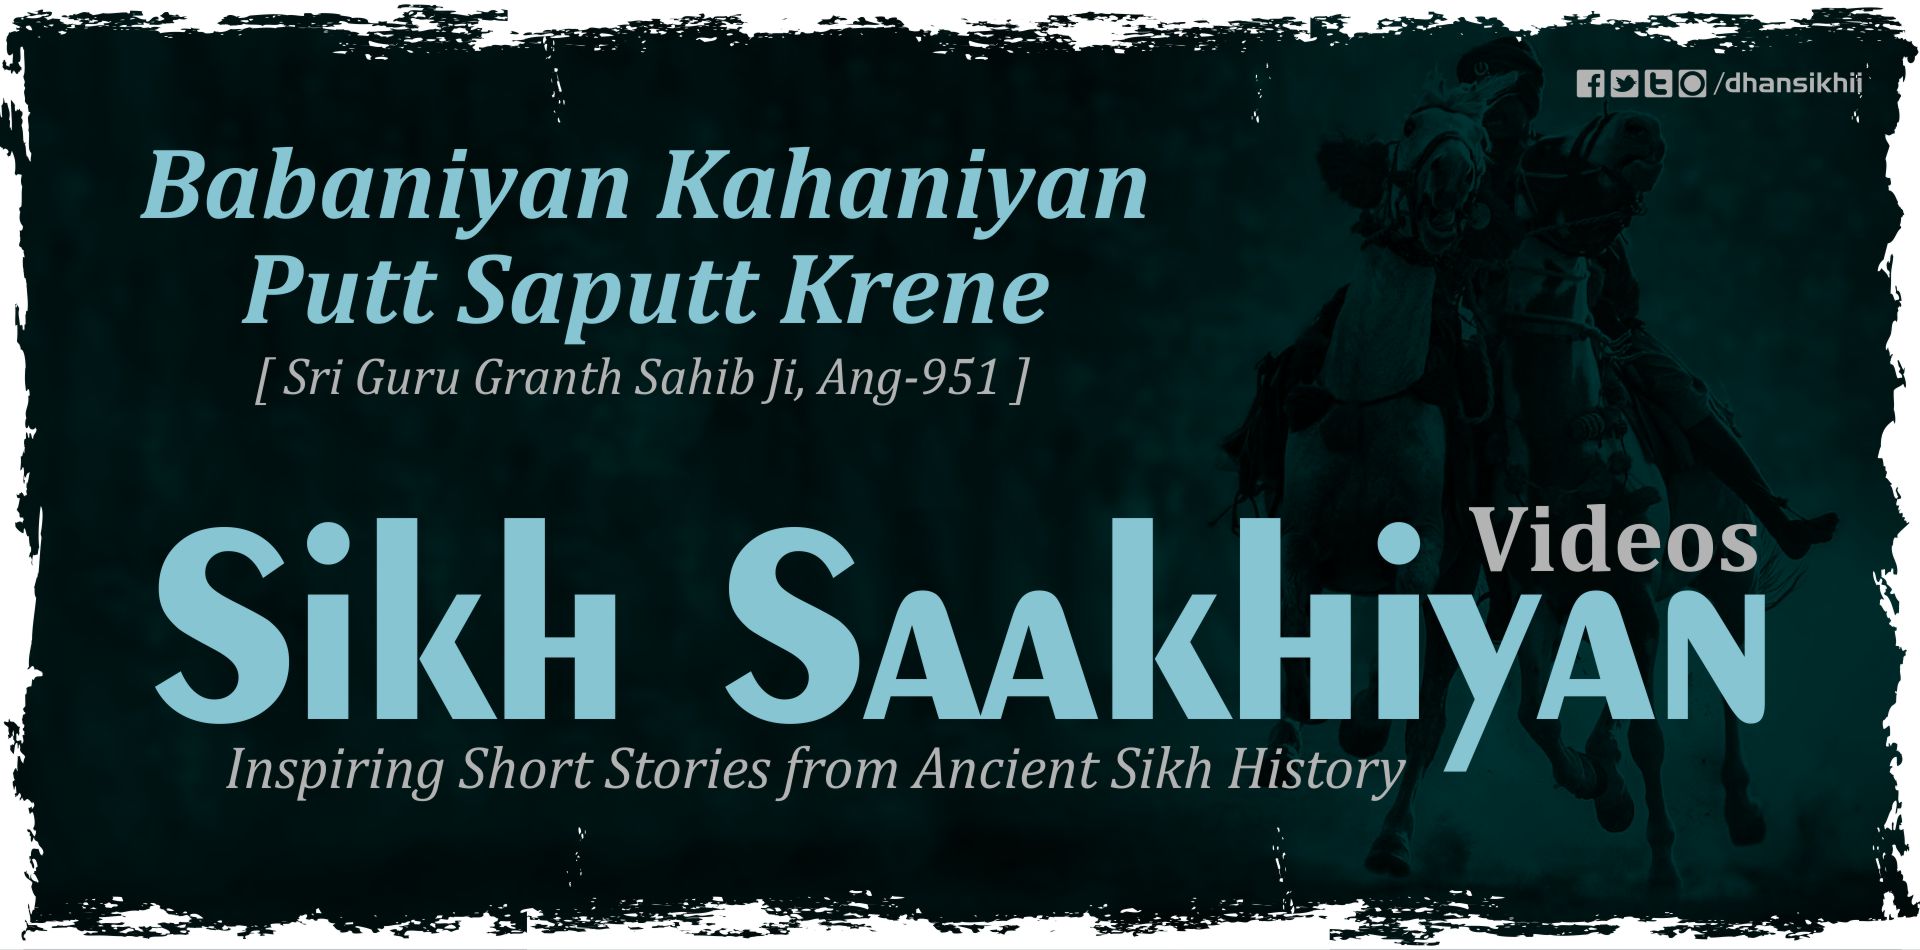 Sikh Saakhis – Inspiring Stories From Ancient Sikh History